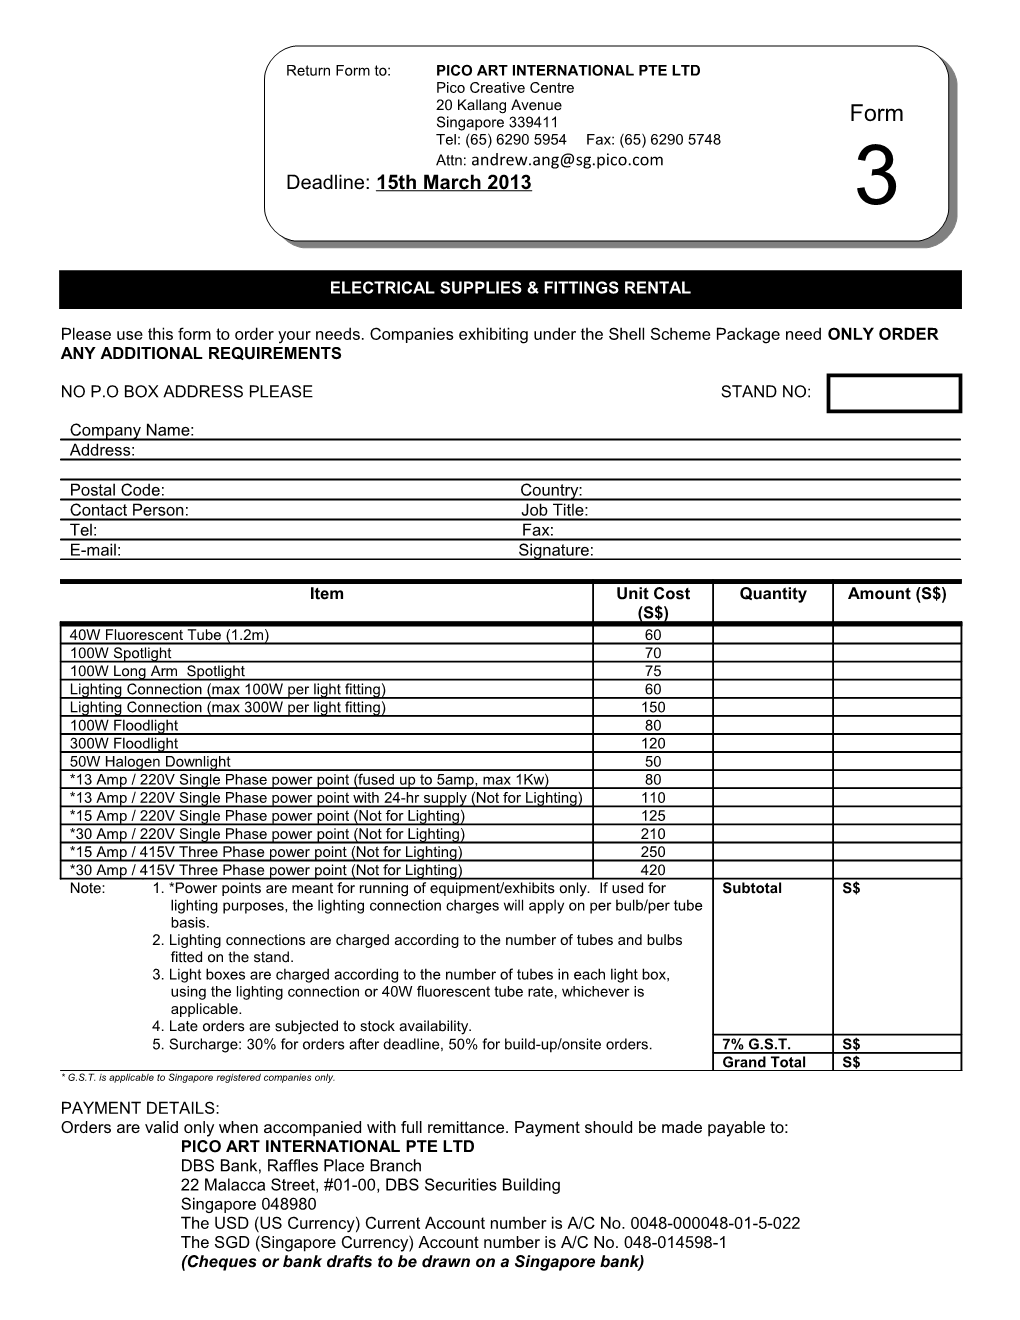 THIS FORM MUST BE RETURNED by ALL SHELL SCHEME EXHIBITORS by 15Th March 2013